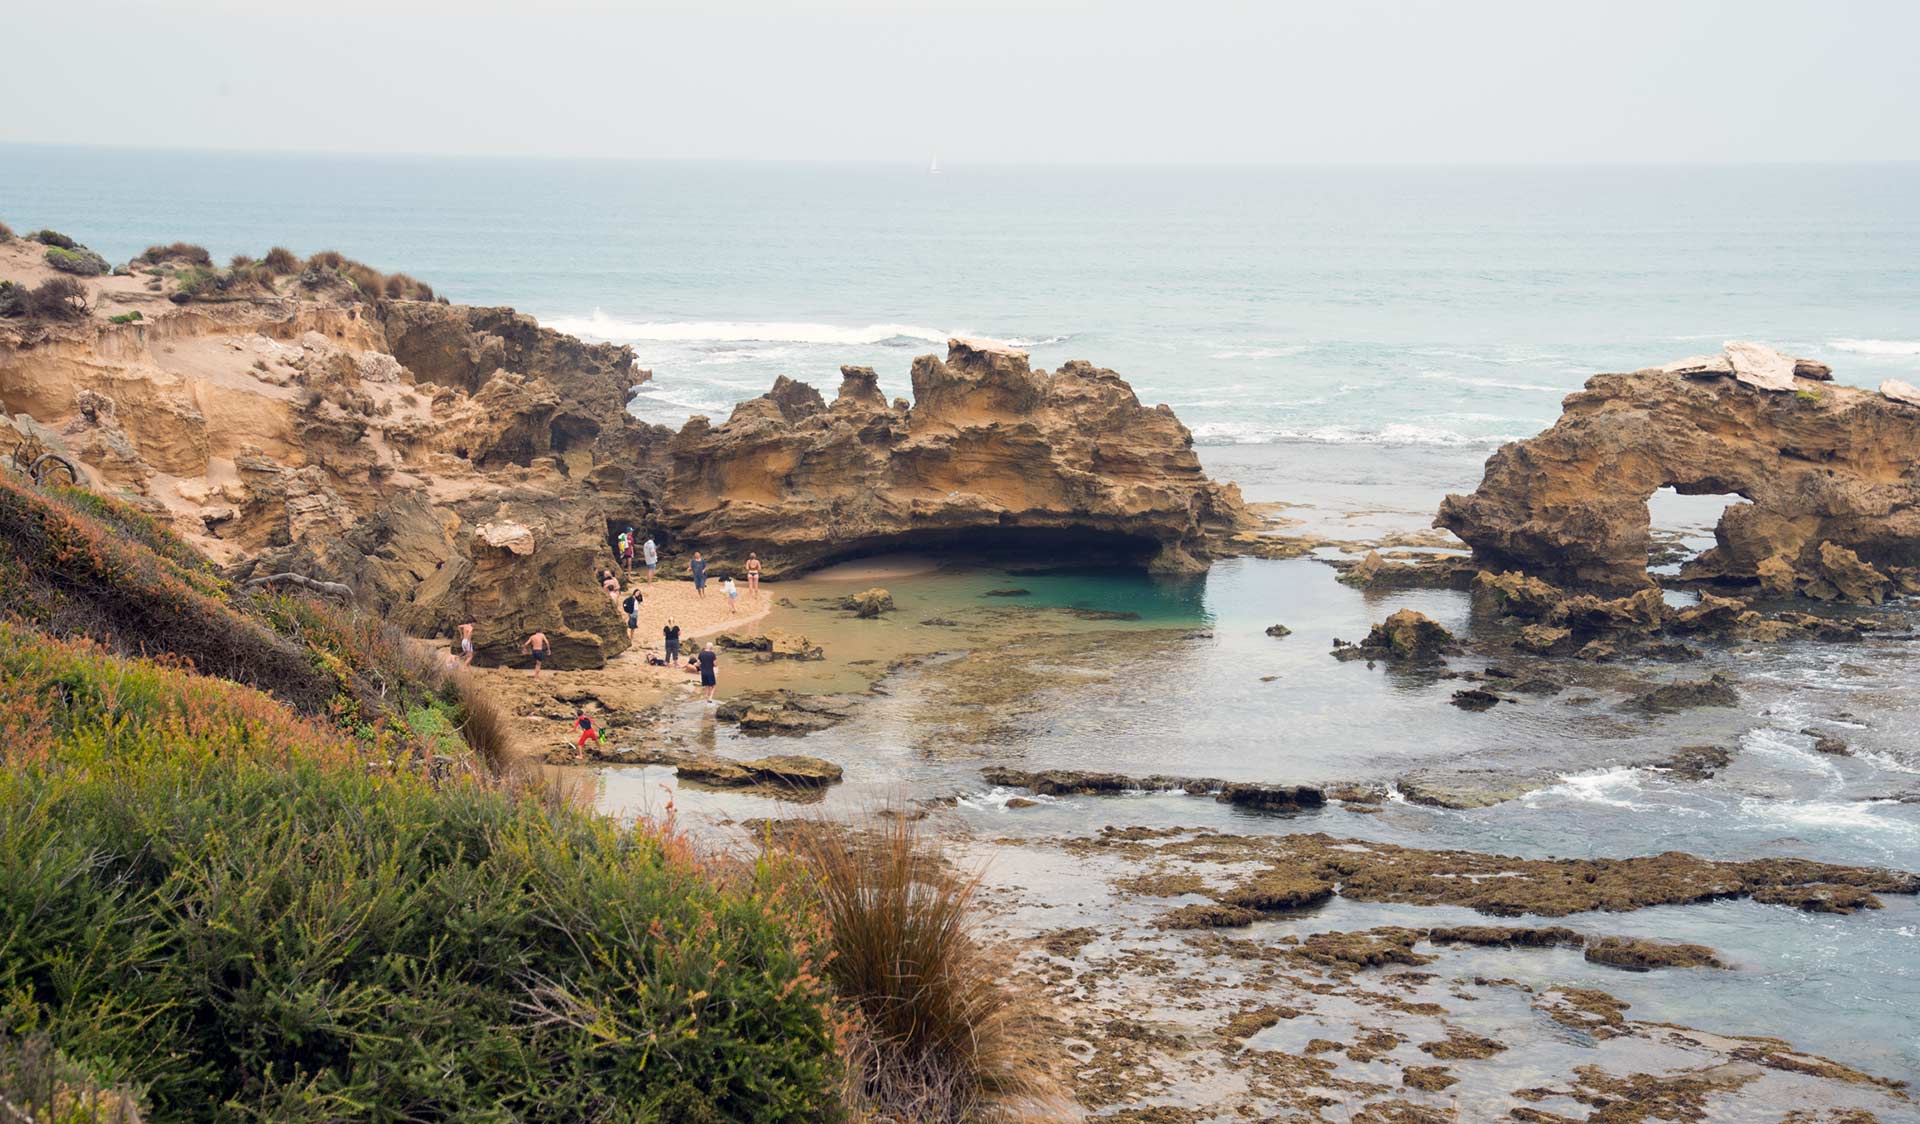 People play on the beach and explore the rock pools among the sandstone formations at Rye Back Ocean Beach.